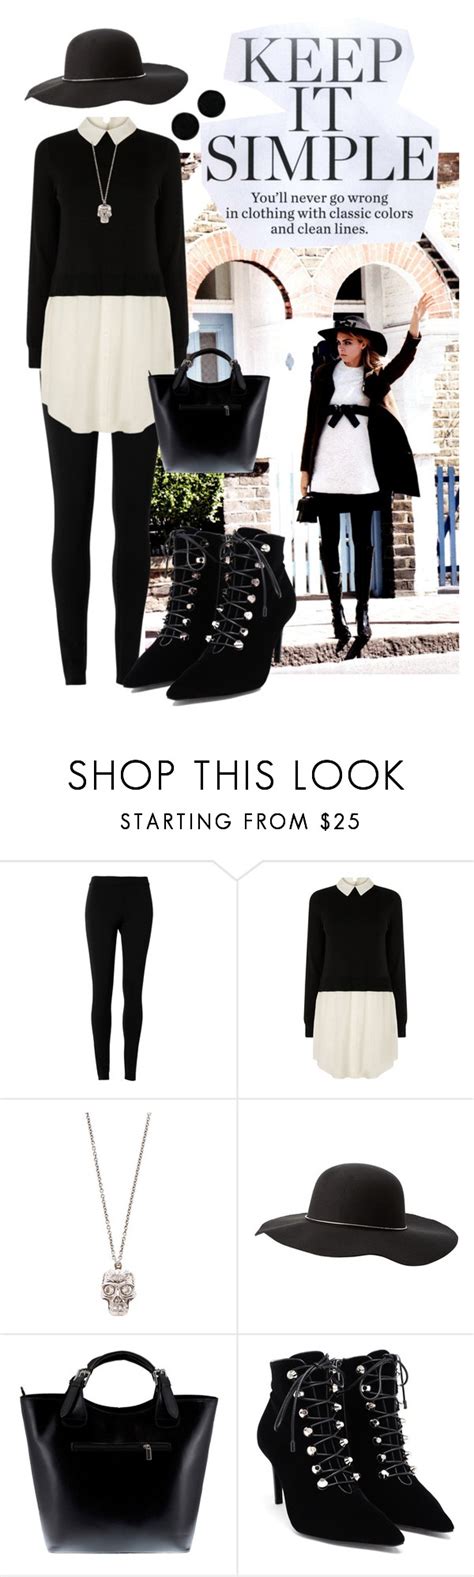 Simple N Sassy By Eliza 81 Liked On Polyvore Featuring Max Studio